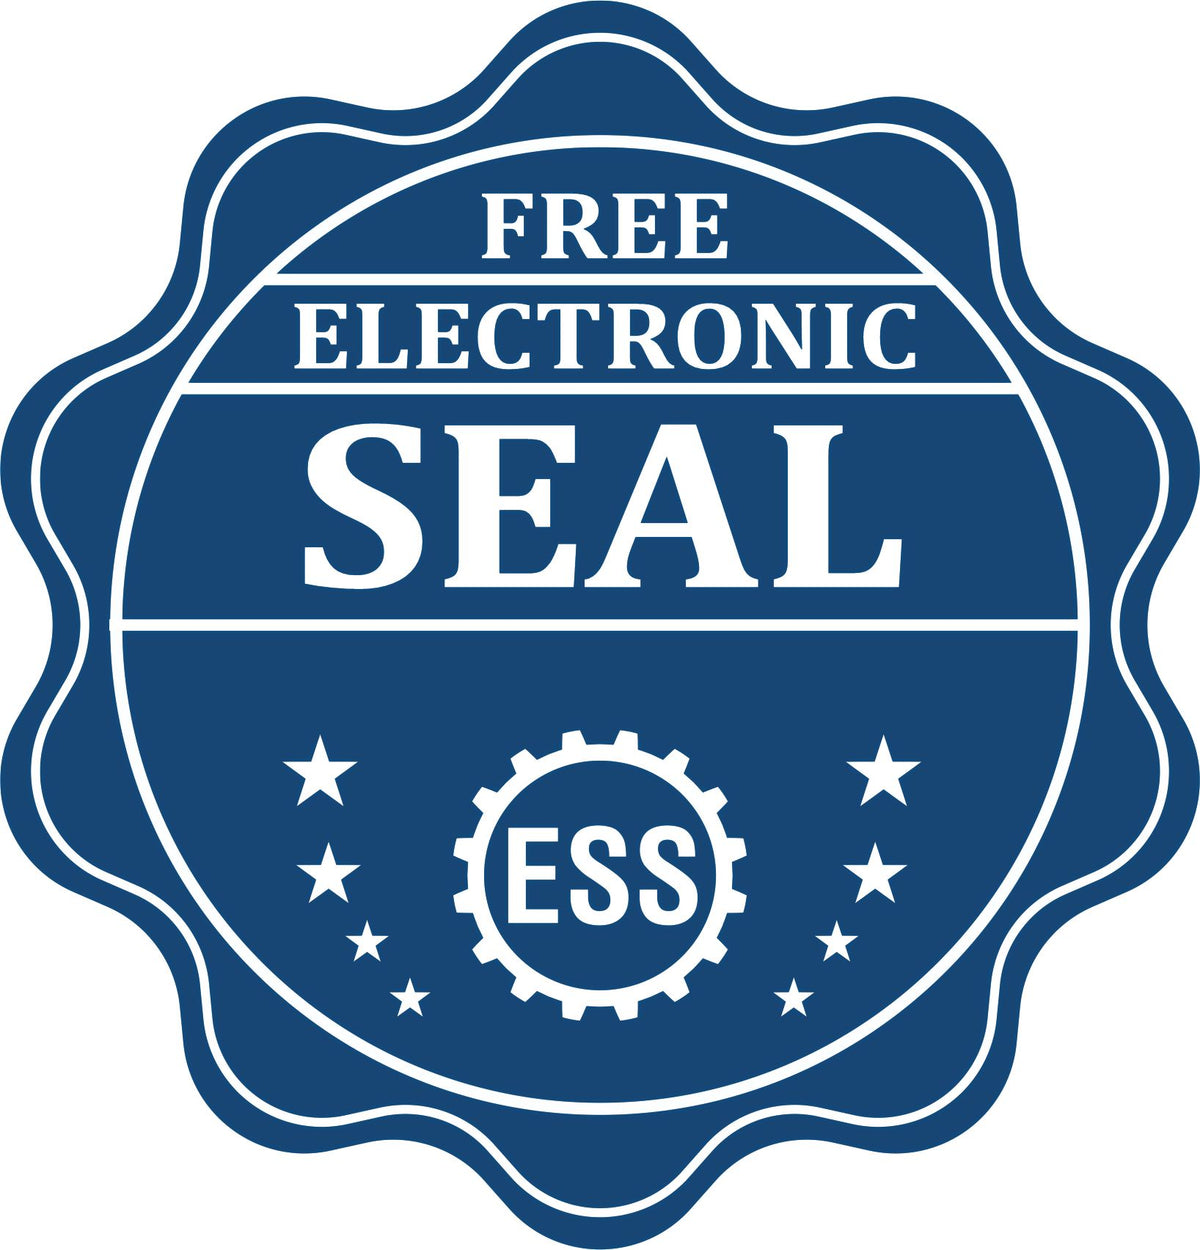 A badge showing a free electronic seal for the Handheld Missouri Professional Engineer Embosser with stars and the ESS gear on the emblem.